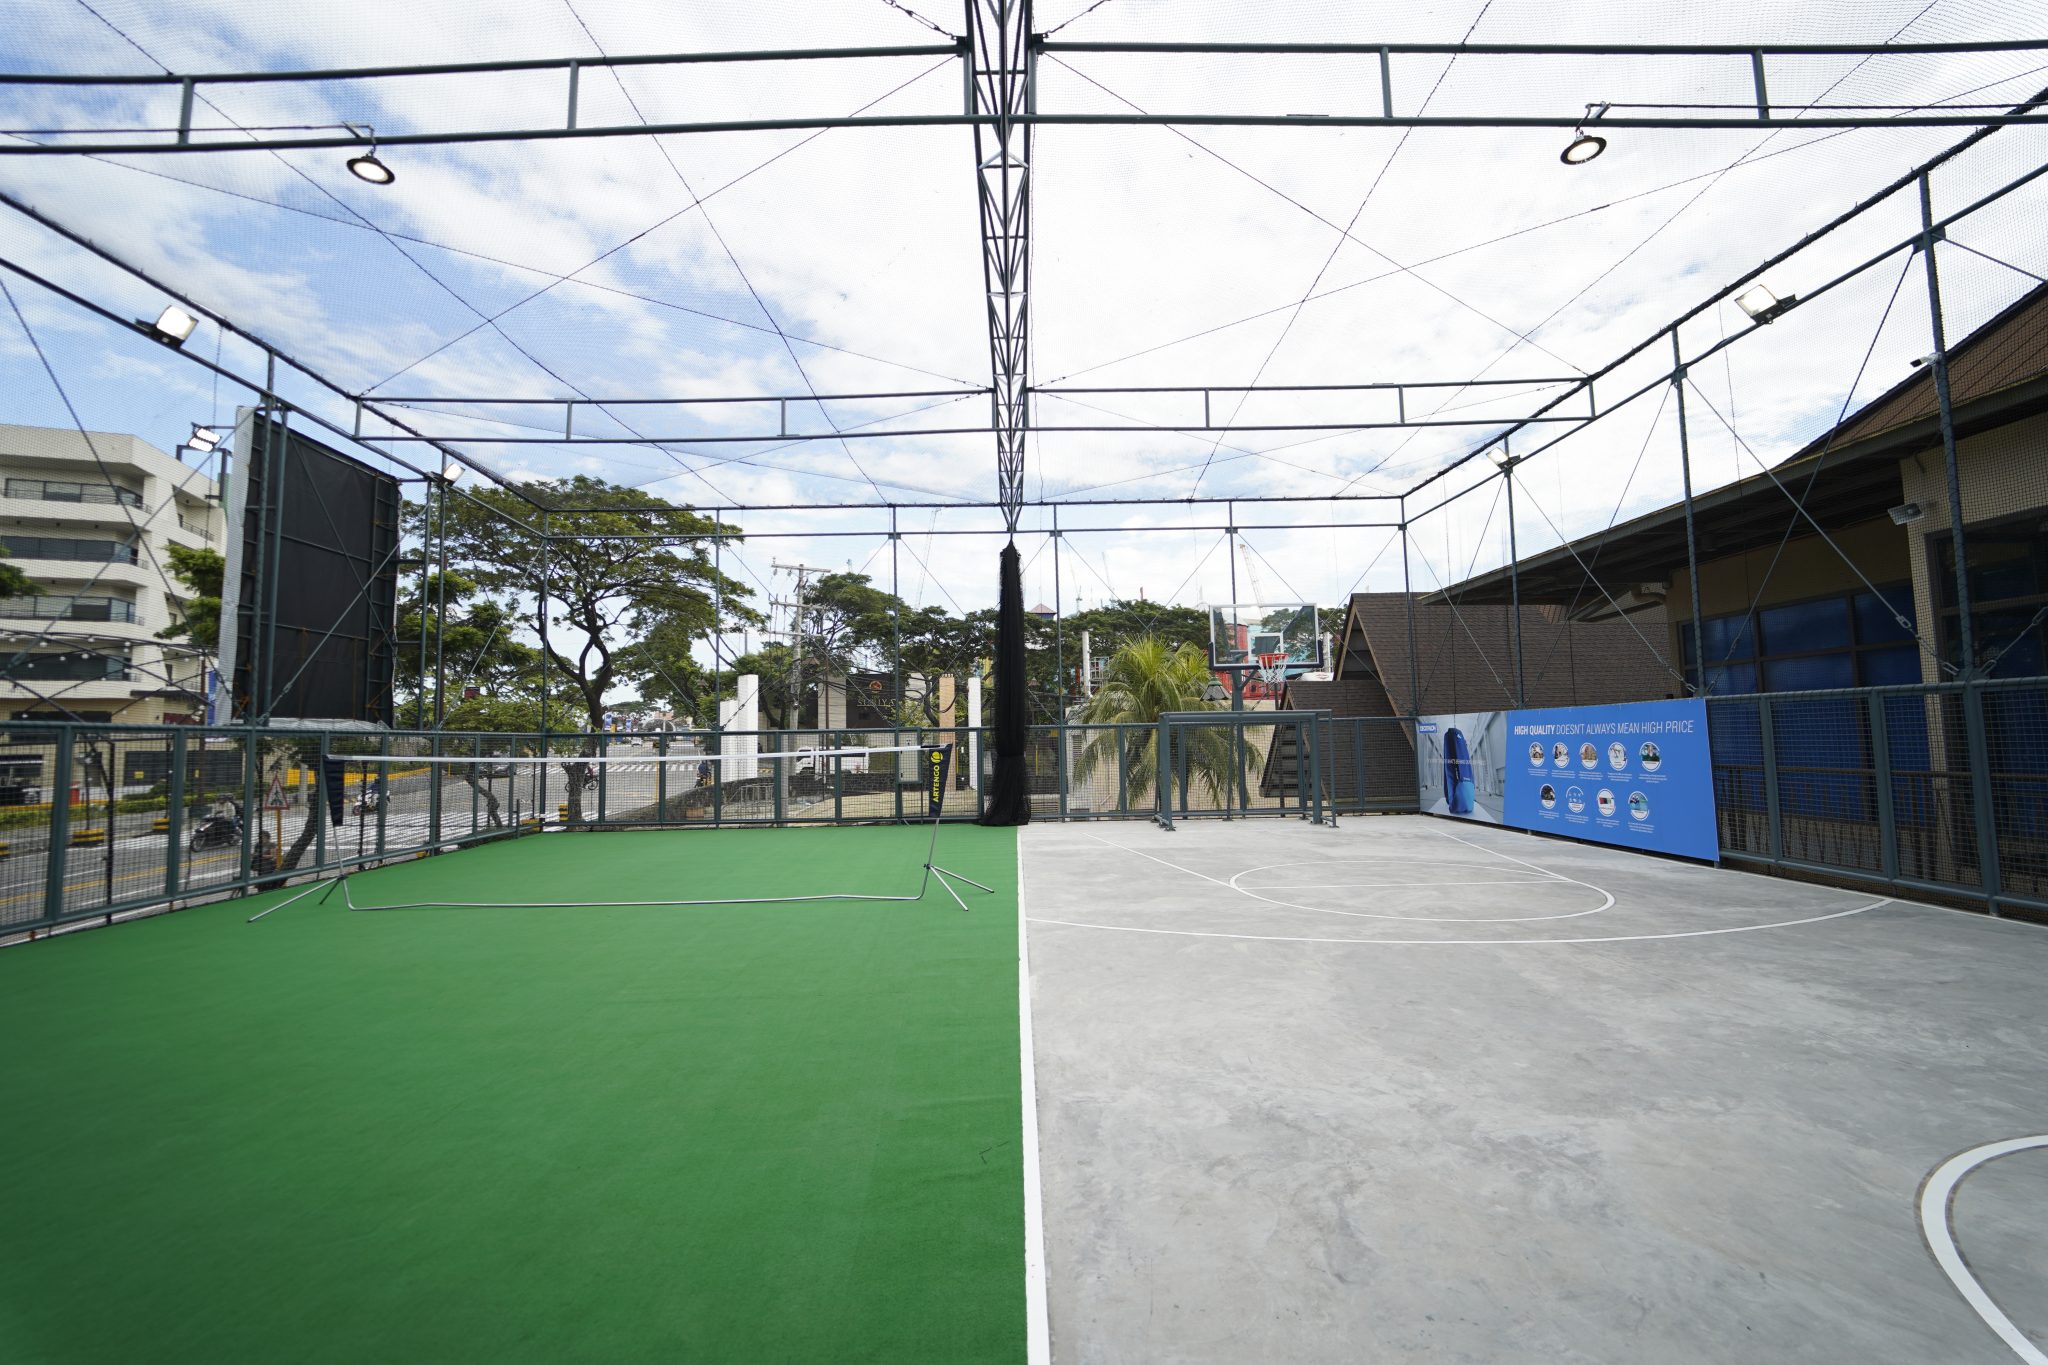 All Decathlon stores in the Philippines contain a large playground, spanning more than 350 square meters that will be free and accessible to all